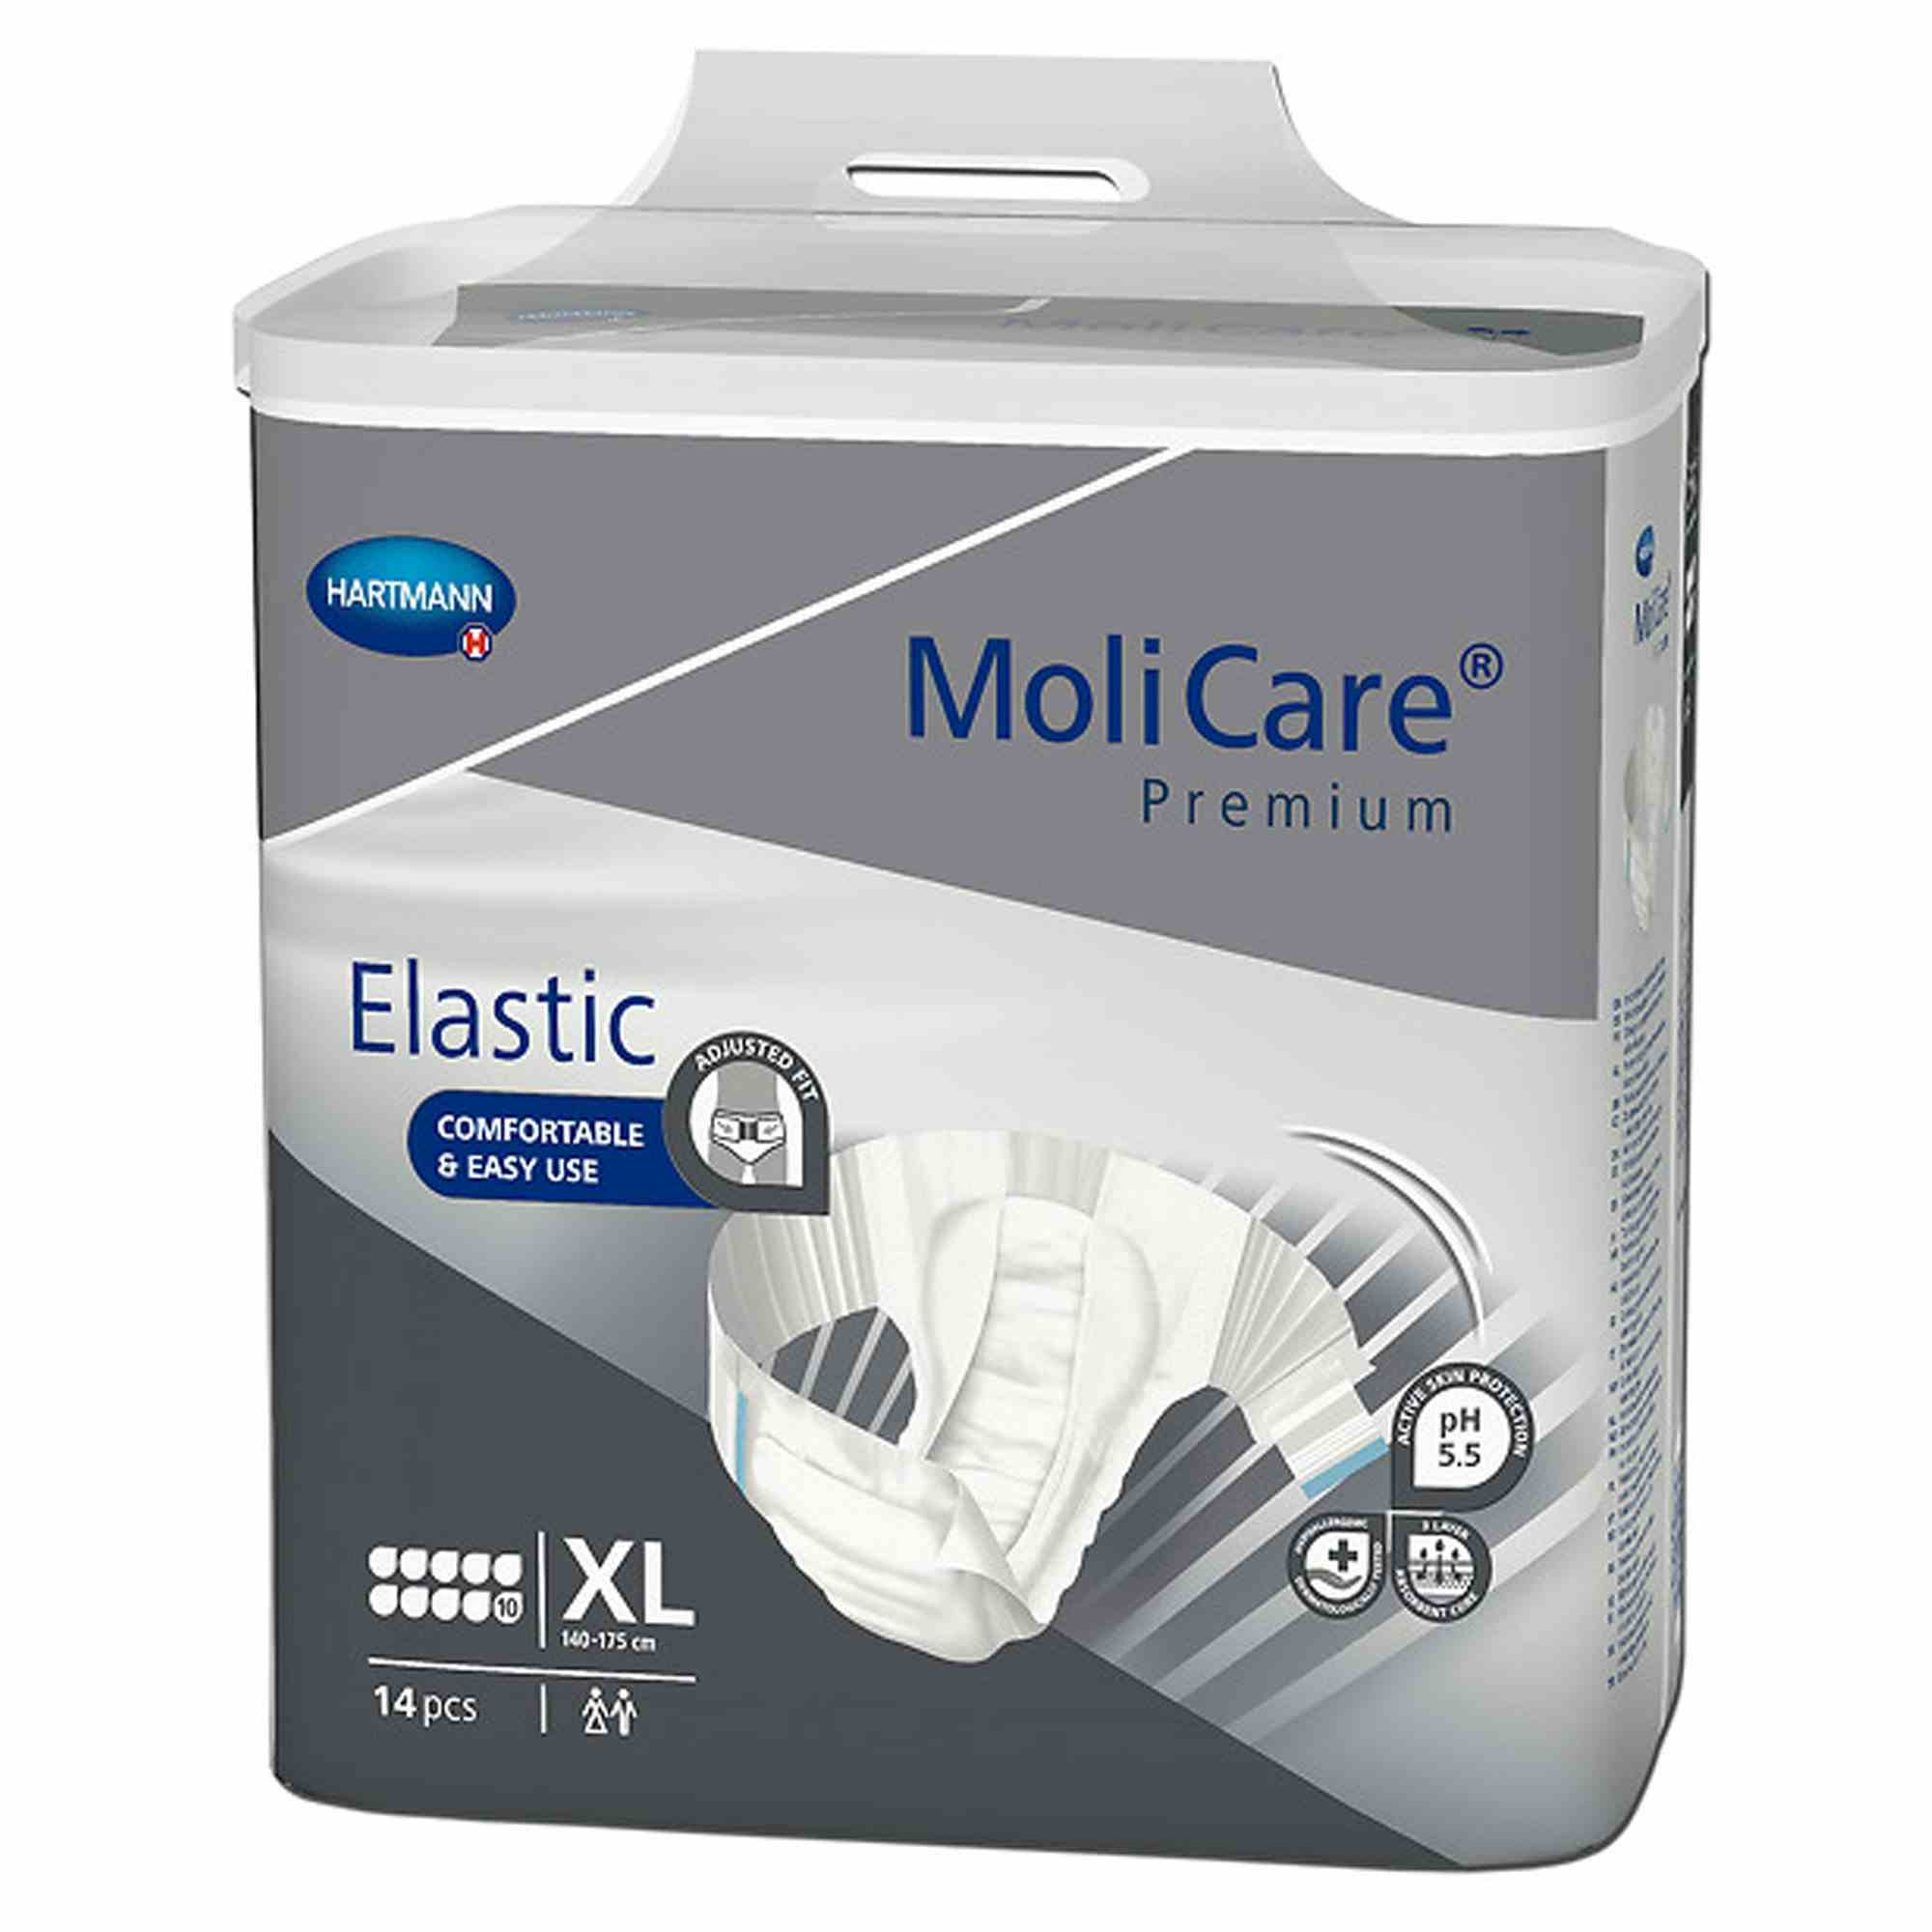 MoliCare Premium 10D Disposable Brief Adult Diapers with Tabs, Heavy Absorbency, 165674, X-Large (57-68") - Case of 56